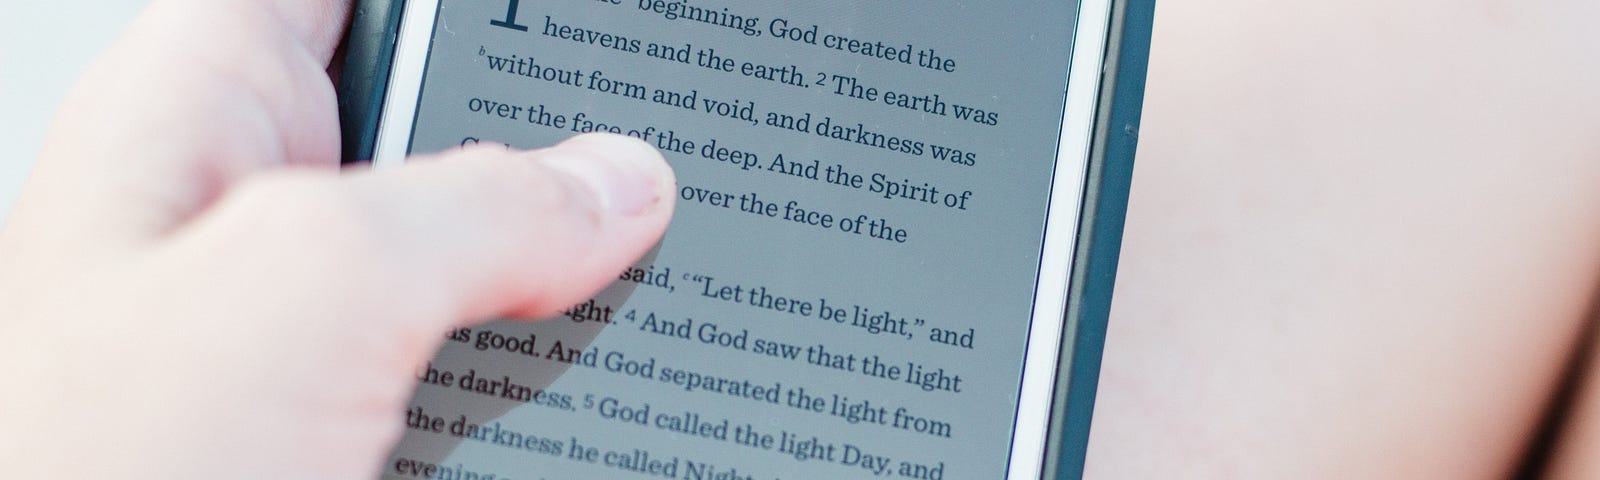 A cell phone with a digital version of the book of Genesis showing on the screen